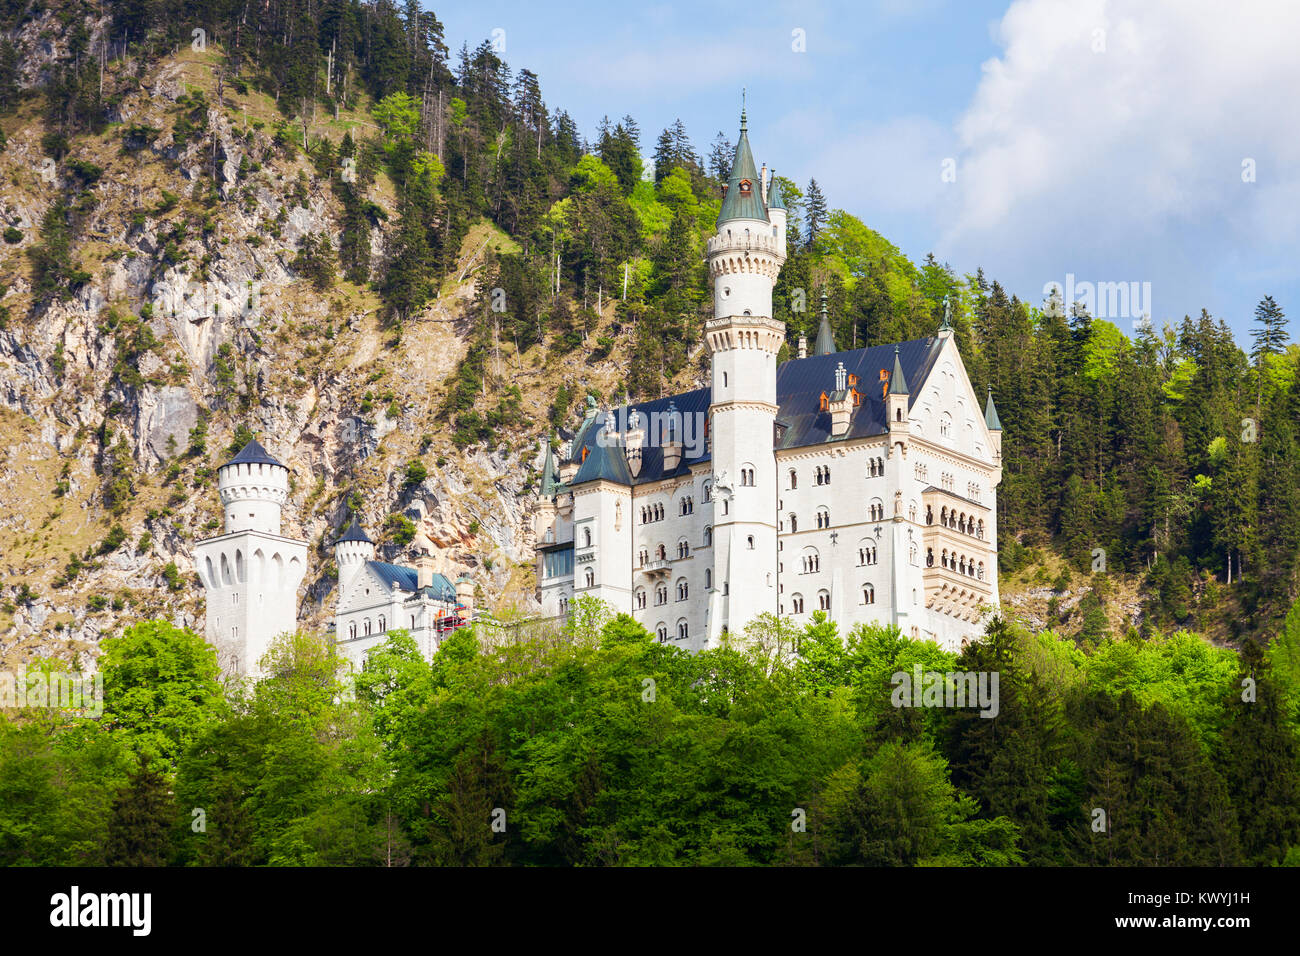 Schloss Neuschwanstein Castle Or New Swanstone Castle Is A Romanesque Revival Palace In 8711